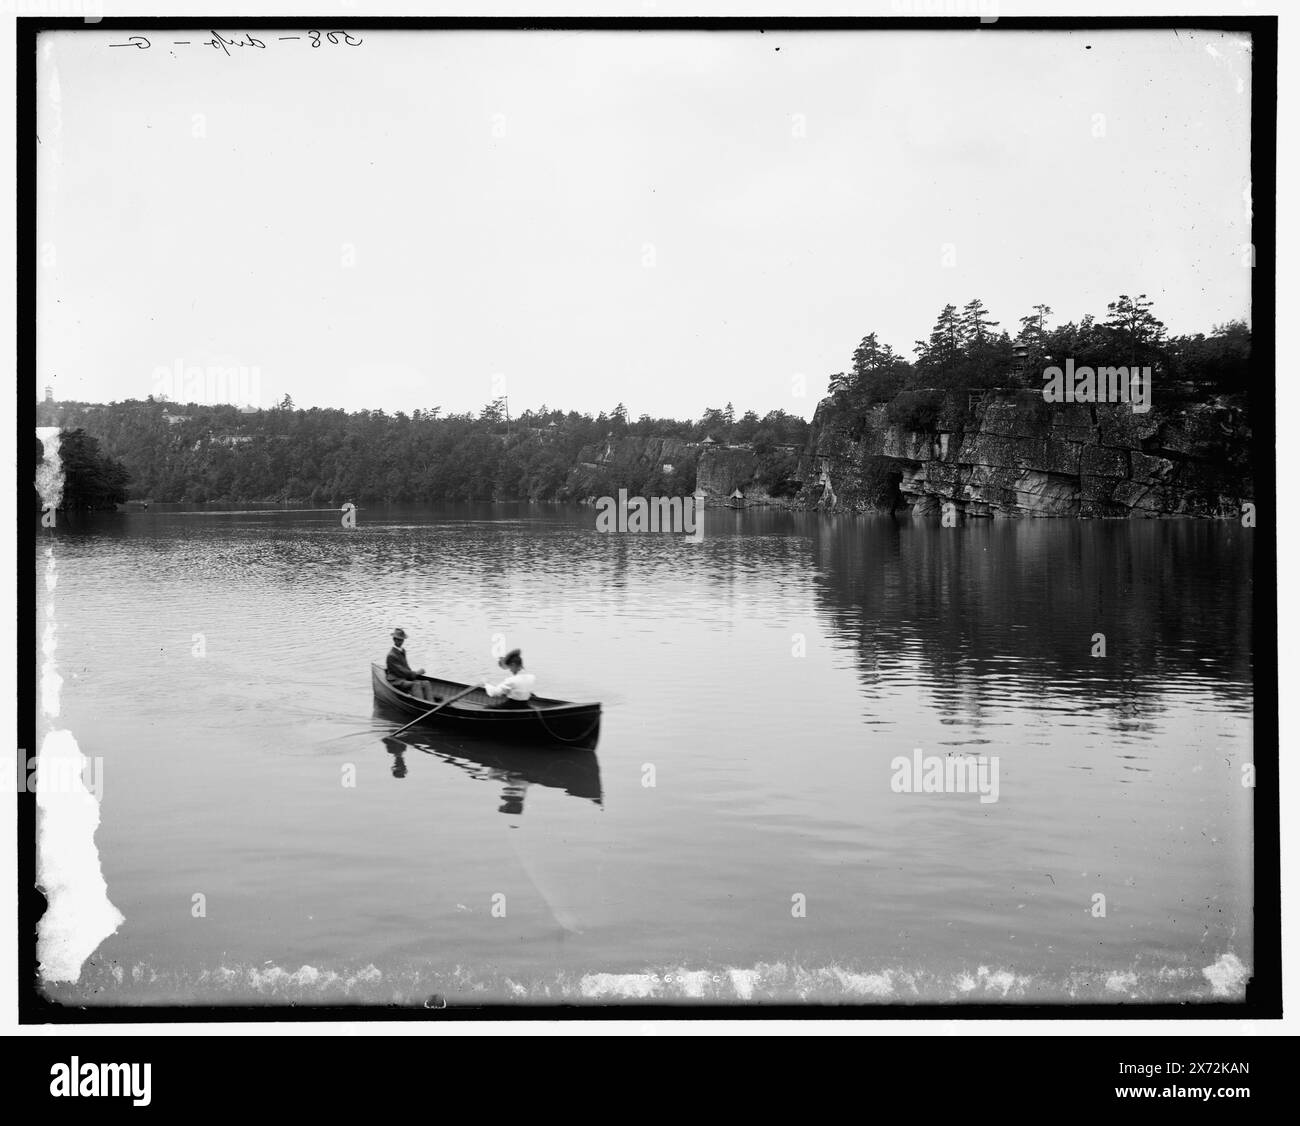 Lake Mohonk House, Lake Mohonk, N.Y., Videodisc images out of sequence; actual left to right order is 1A-06420, 06419 (or 06418), 06417, 06416, 06415., Five-part panorama with close variant of left center section., Center, right center, and right negatives also issued as separate panorama., '507-G' on left negative; '508-G' on left center (A) negative; '508-dup.-G' on left center (B) negative; '509-G' on center negative; '510-G' on right center negative., B&w glass transparencies: Left center section B, LC-D4-10660LCB; center section, LC-D4-10660C; right center section, LC-D4-10660RC; and righ Stock Photo